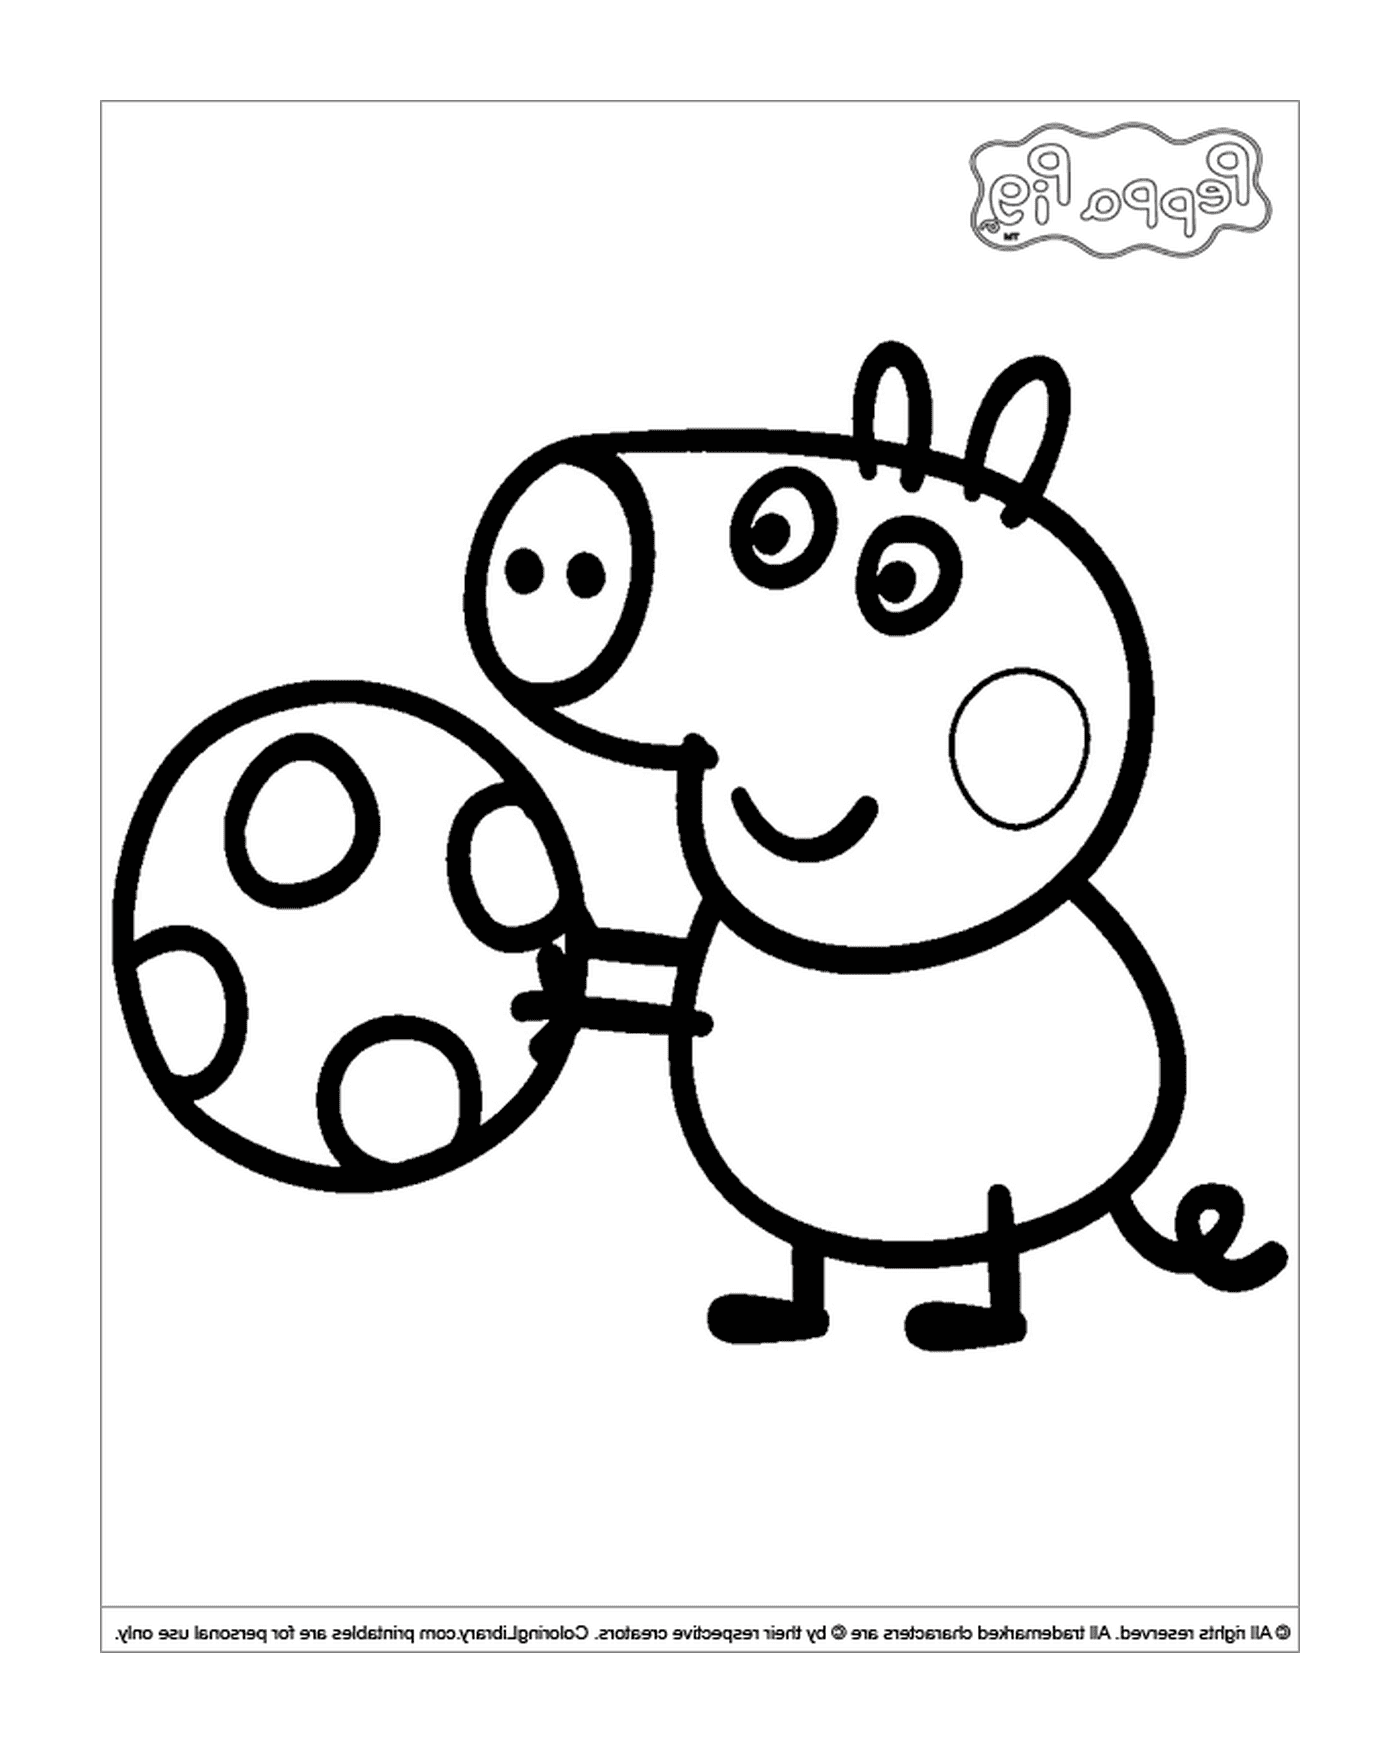  A pig with a soccer ball 